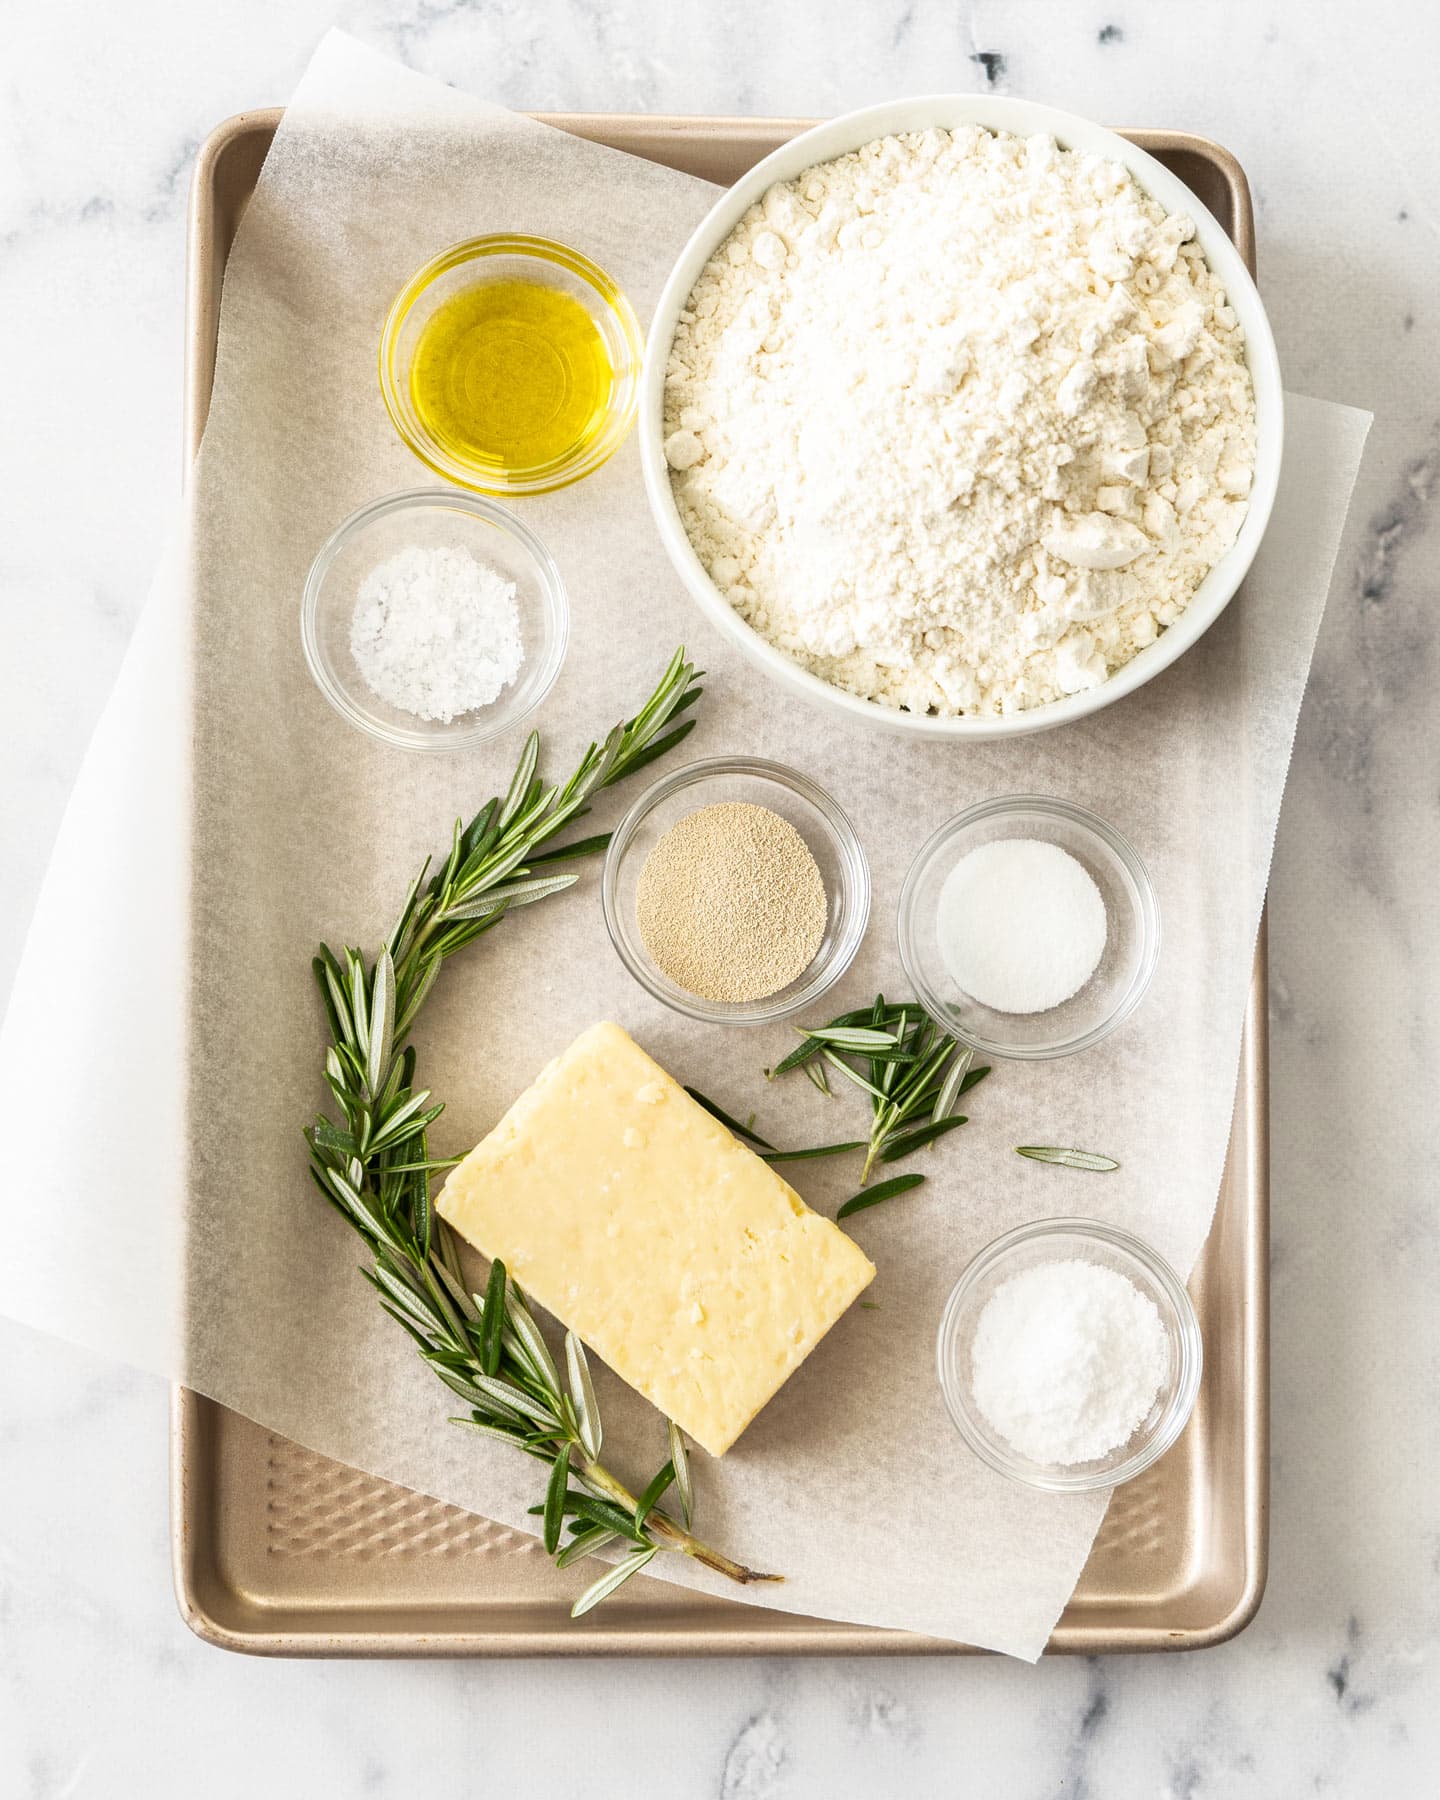 Ingredients for rosemary parmesan bread.